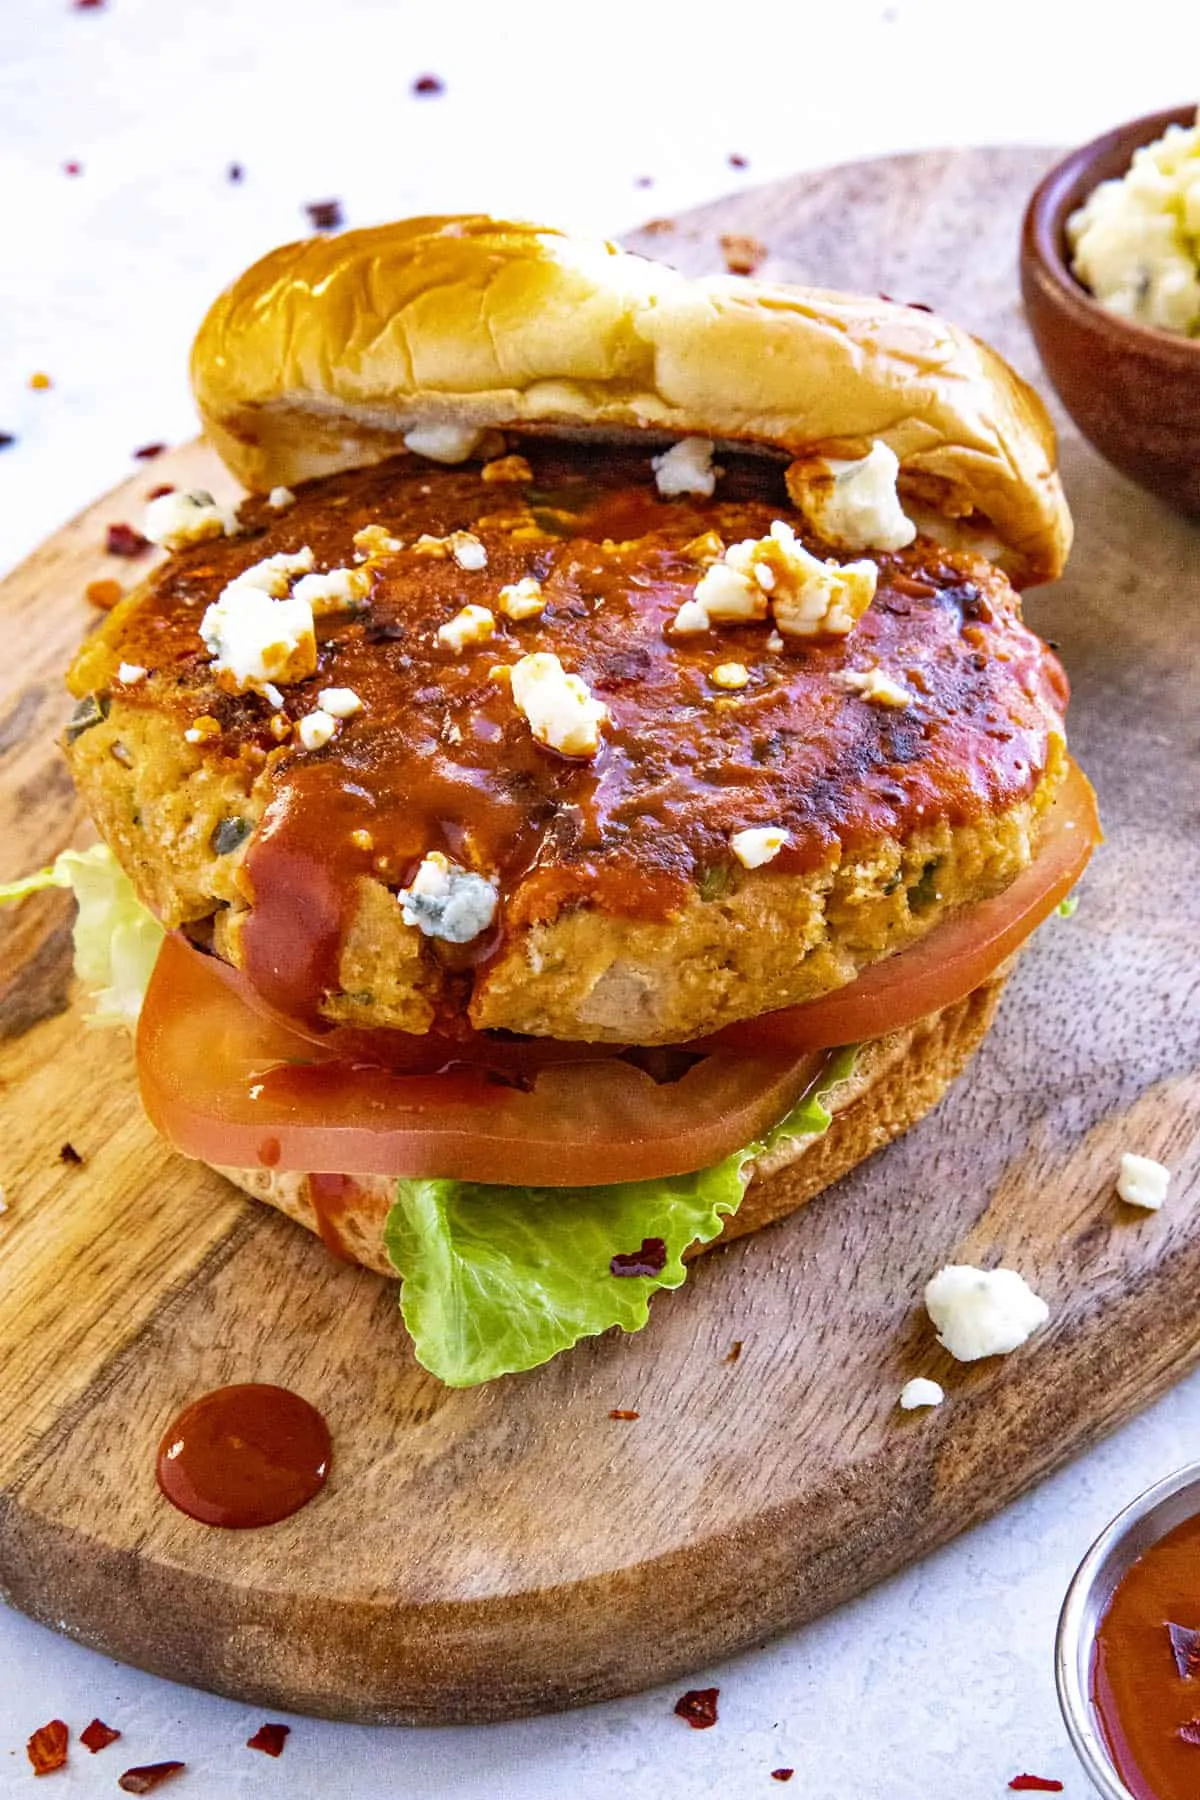 A Buffalo chicken burger with lots of crumbly blue cheese